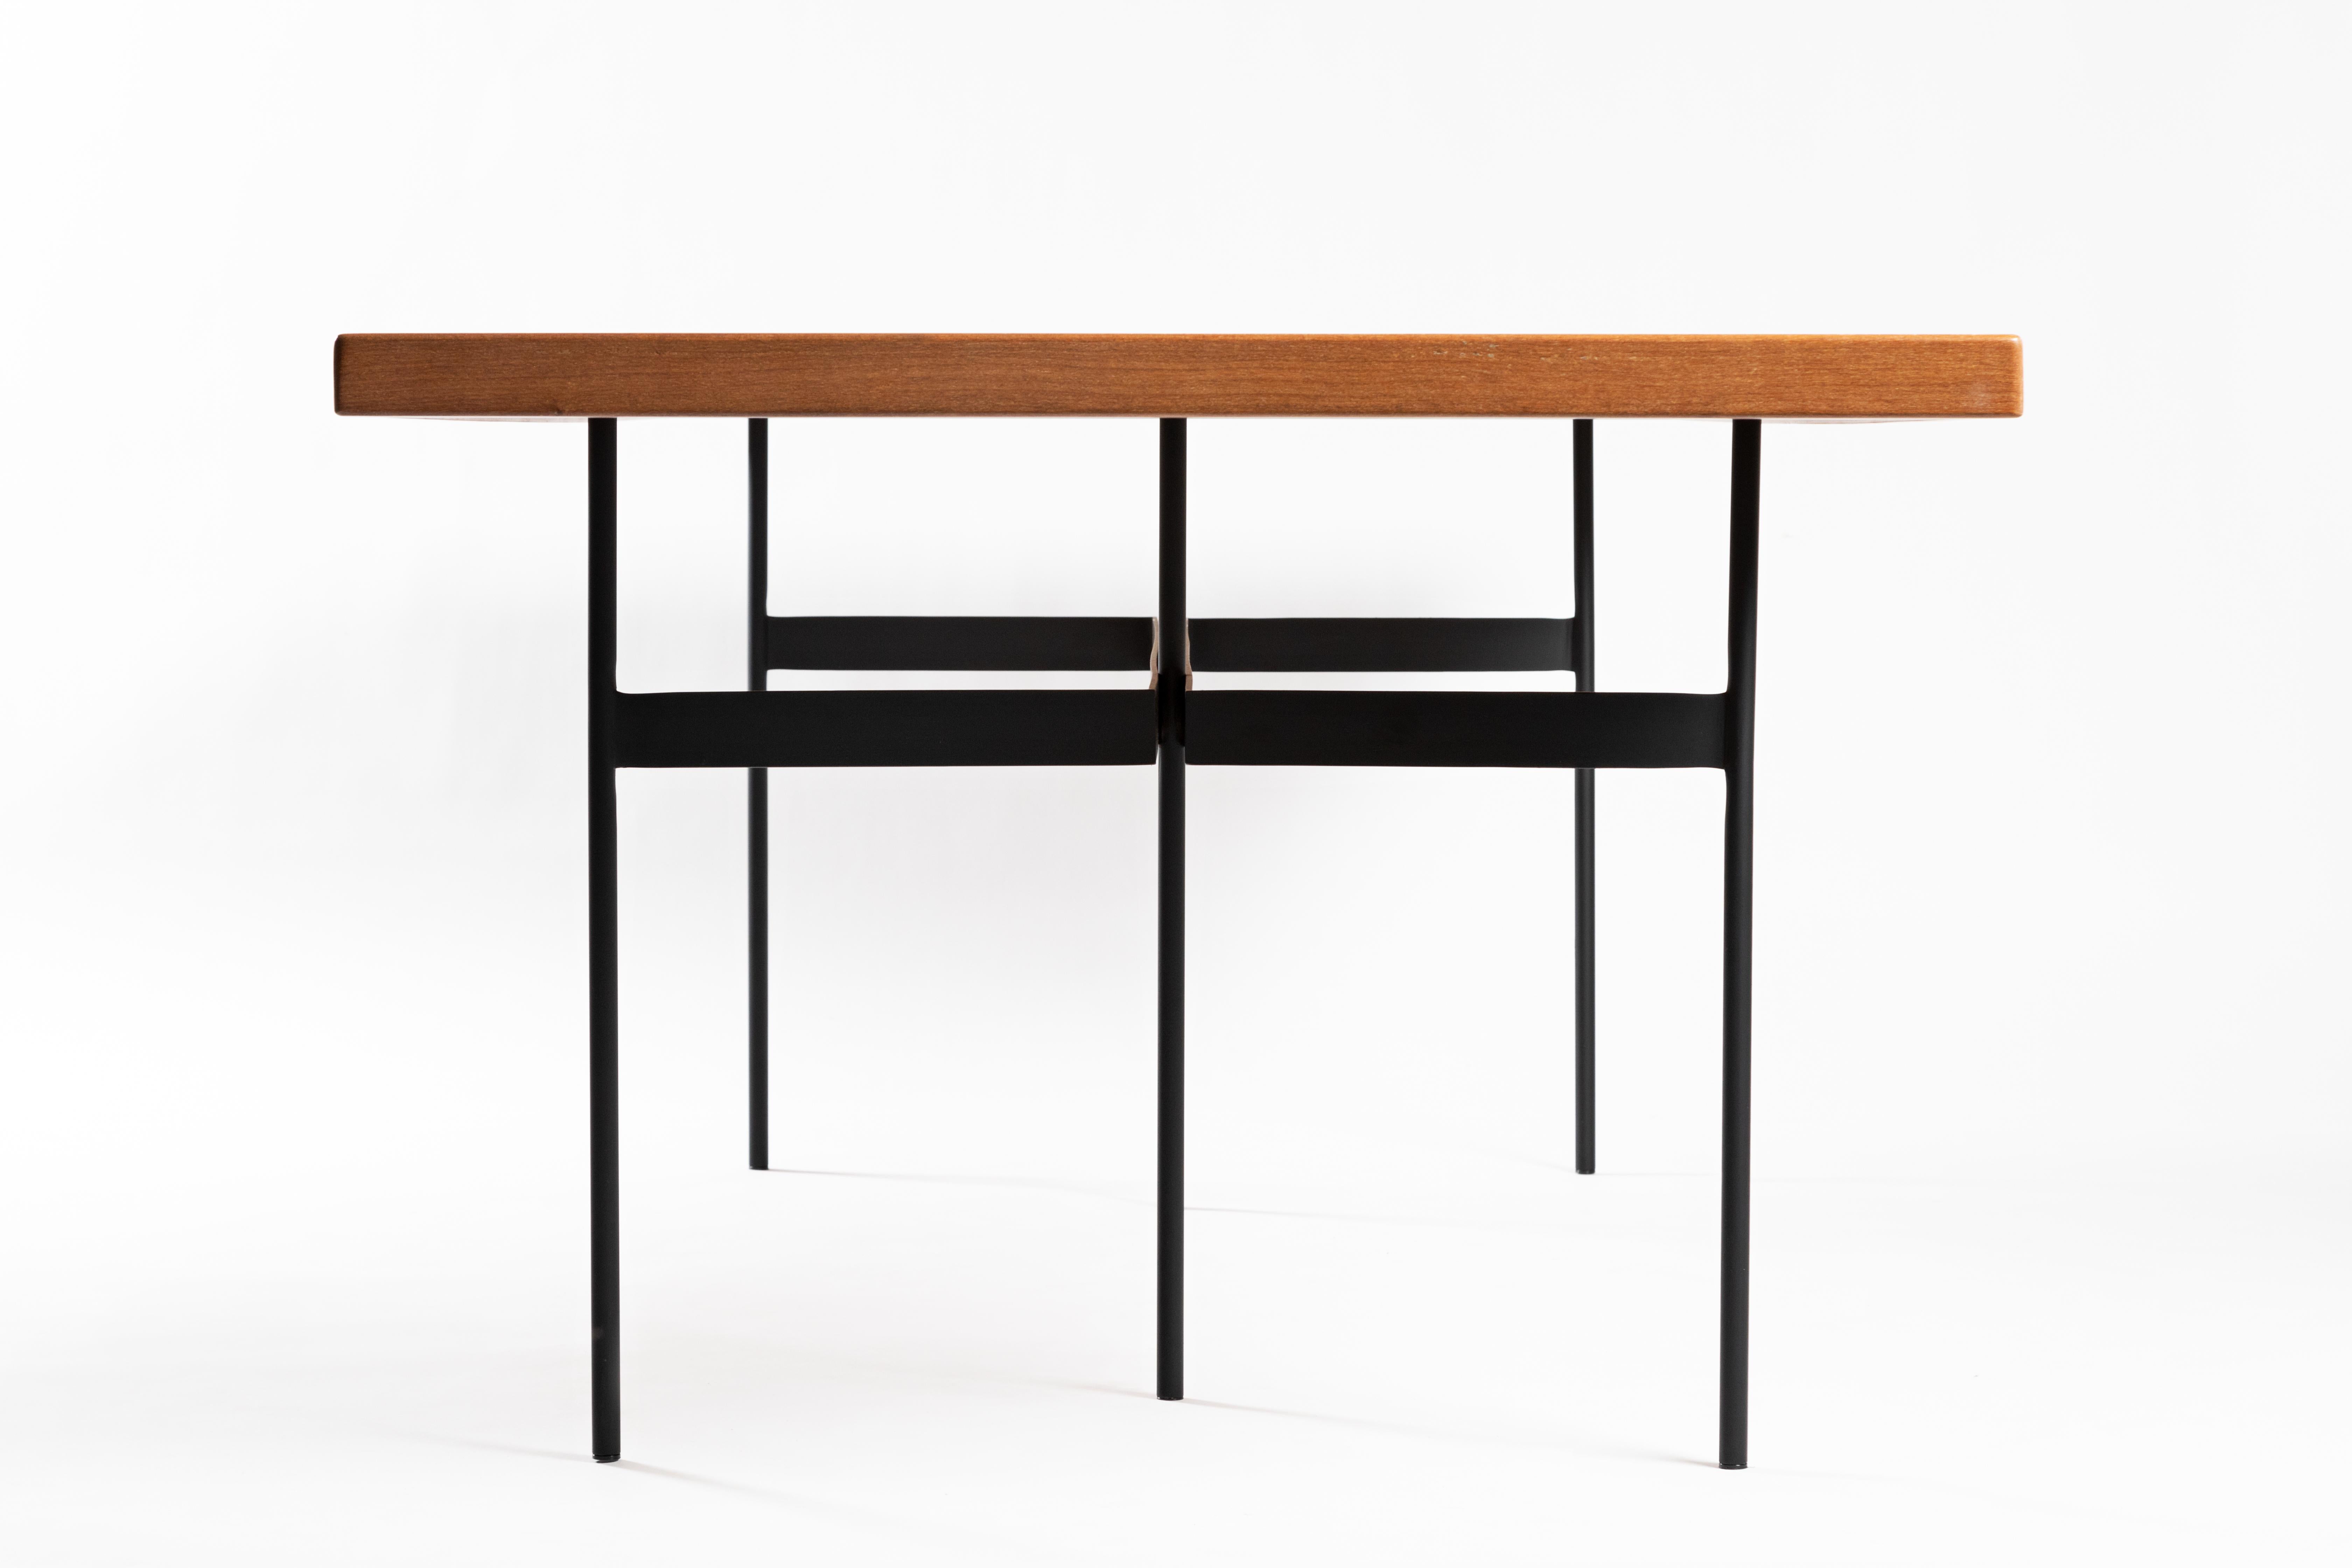 This award winning contemporary Brazilian dining table is made in a minimalist style with solid steel and wood, which lends a simple and powerful design. The table has an architectonic and geometric reasoning, rectangular bars are welded to the